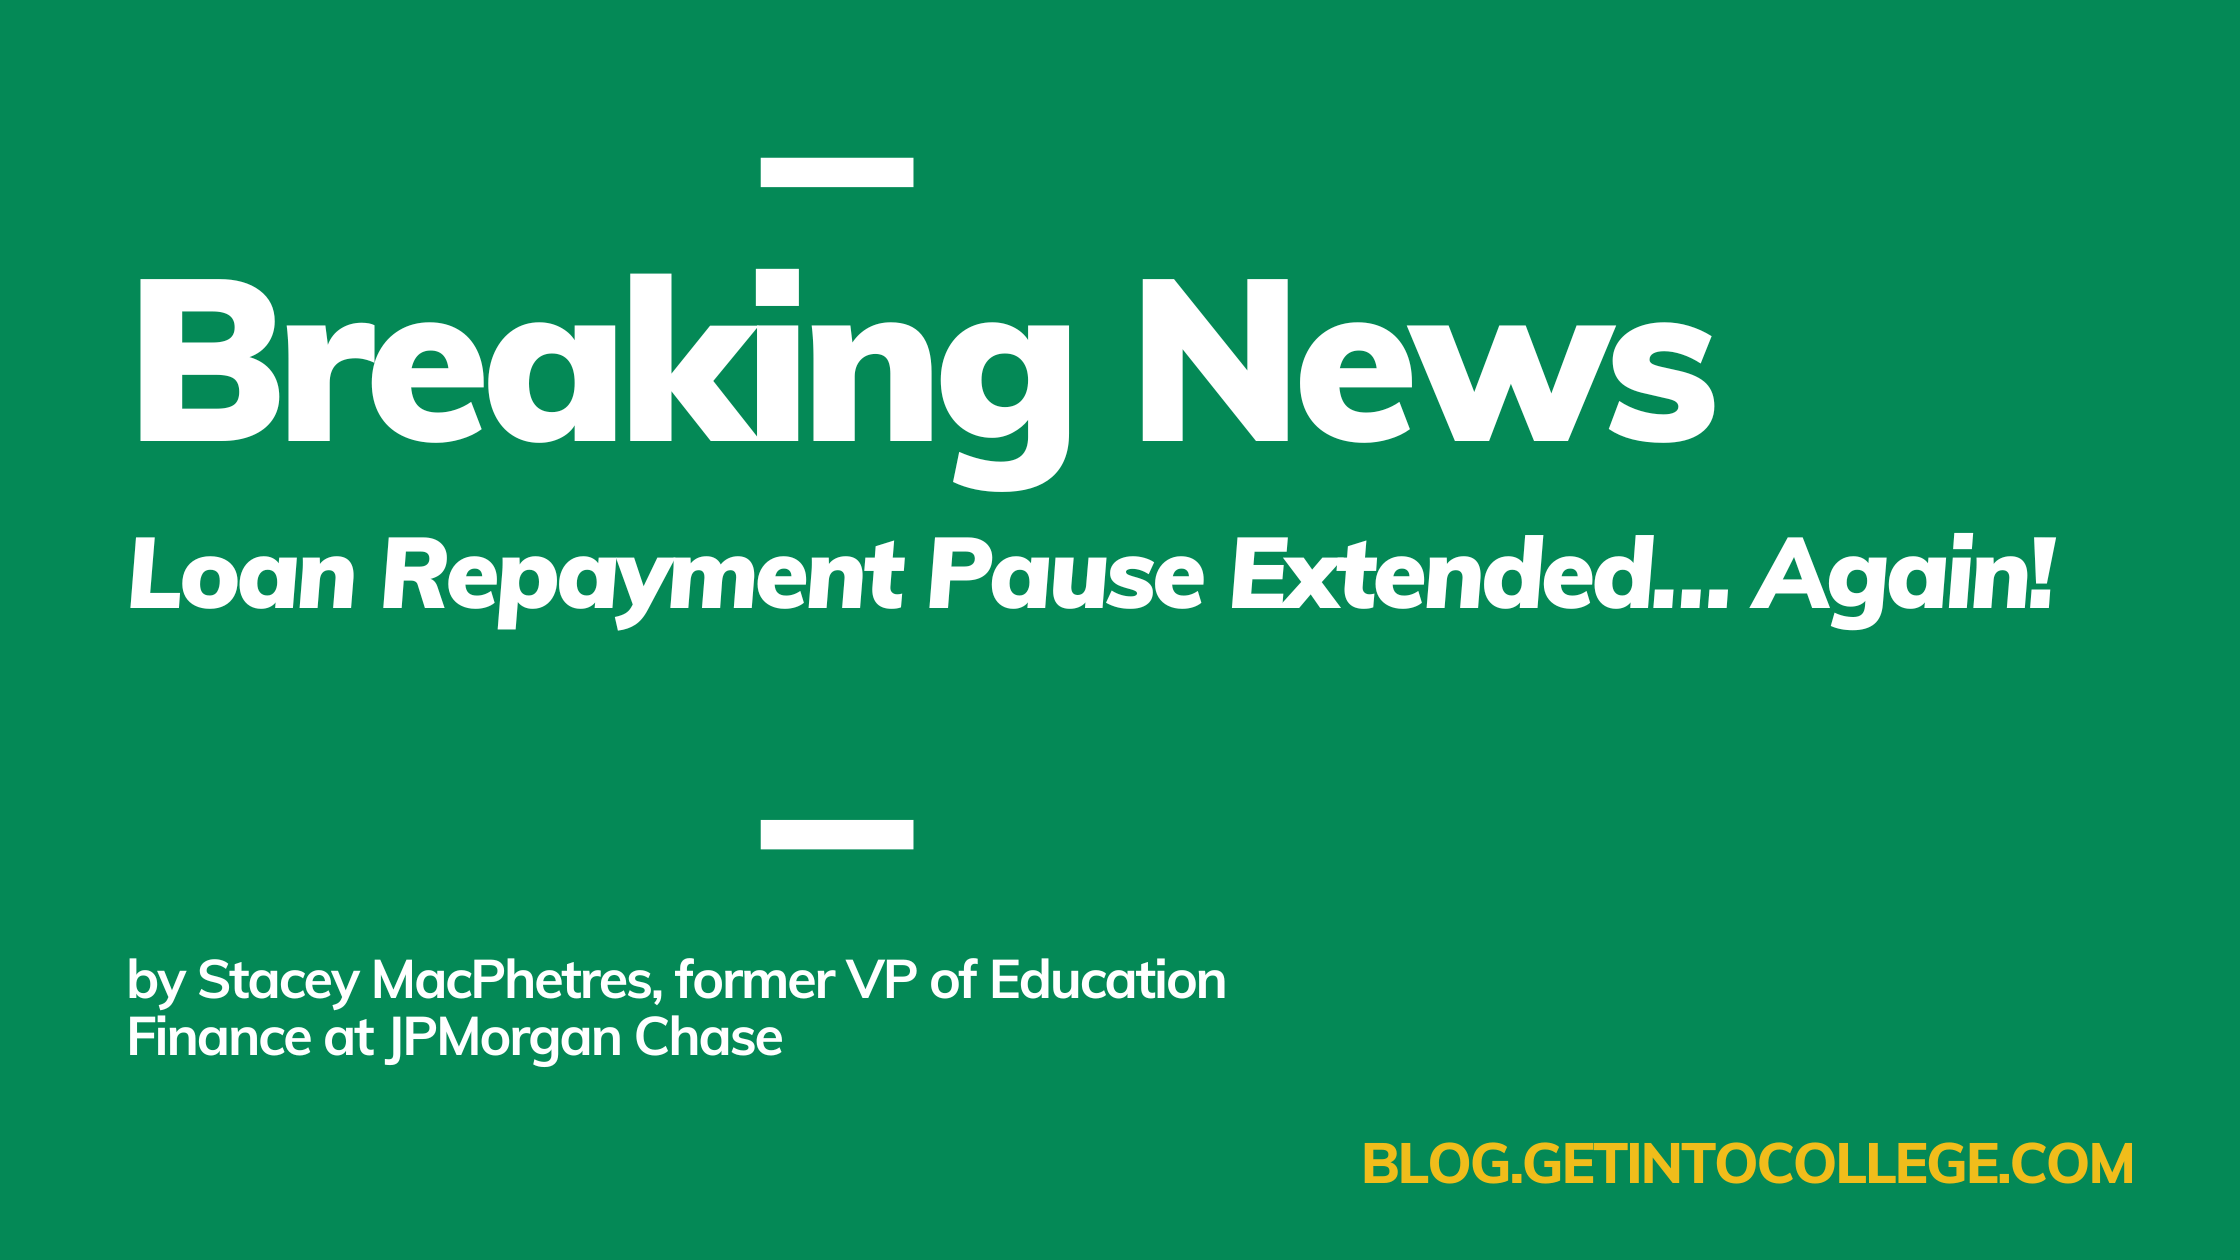 Student Loan Pause Extended Again 